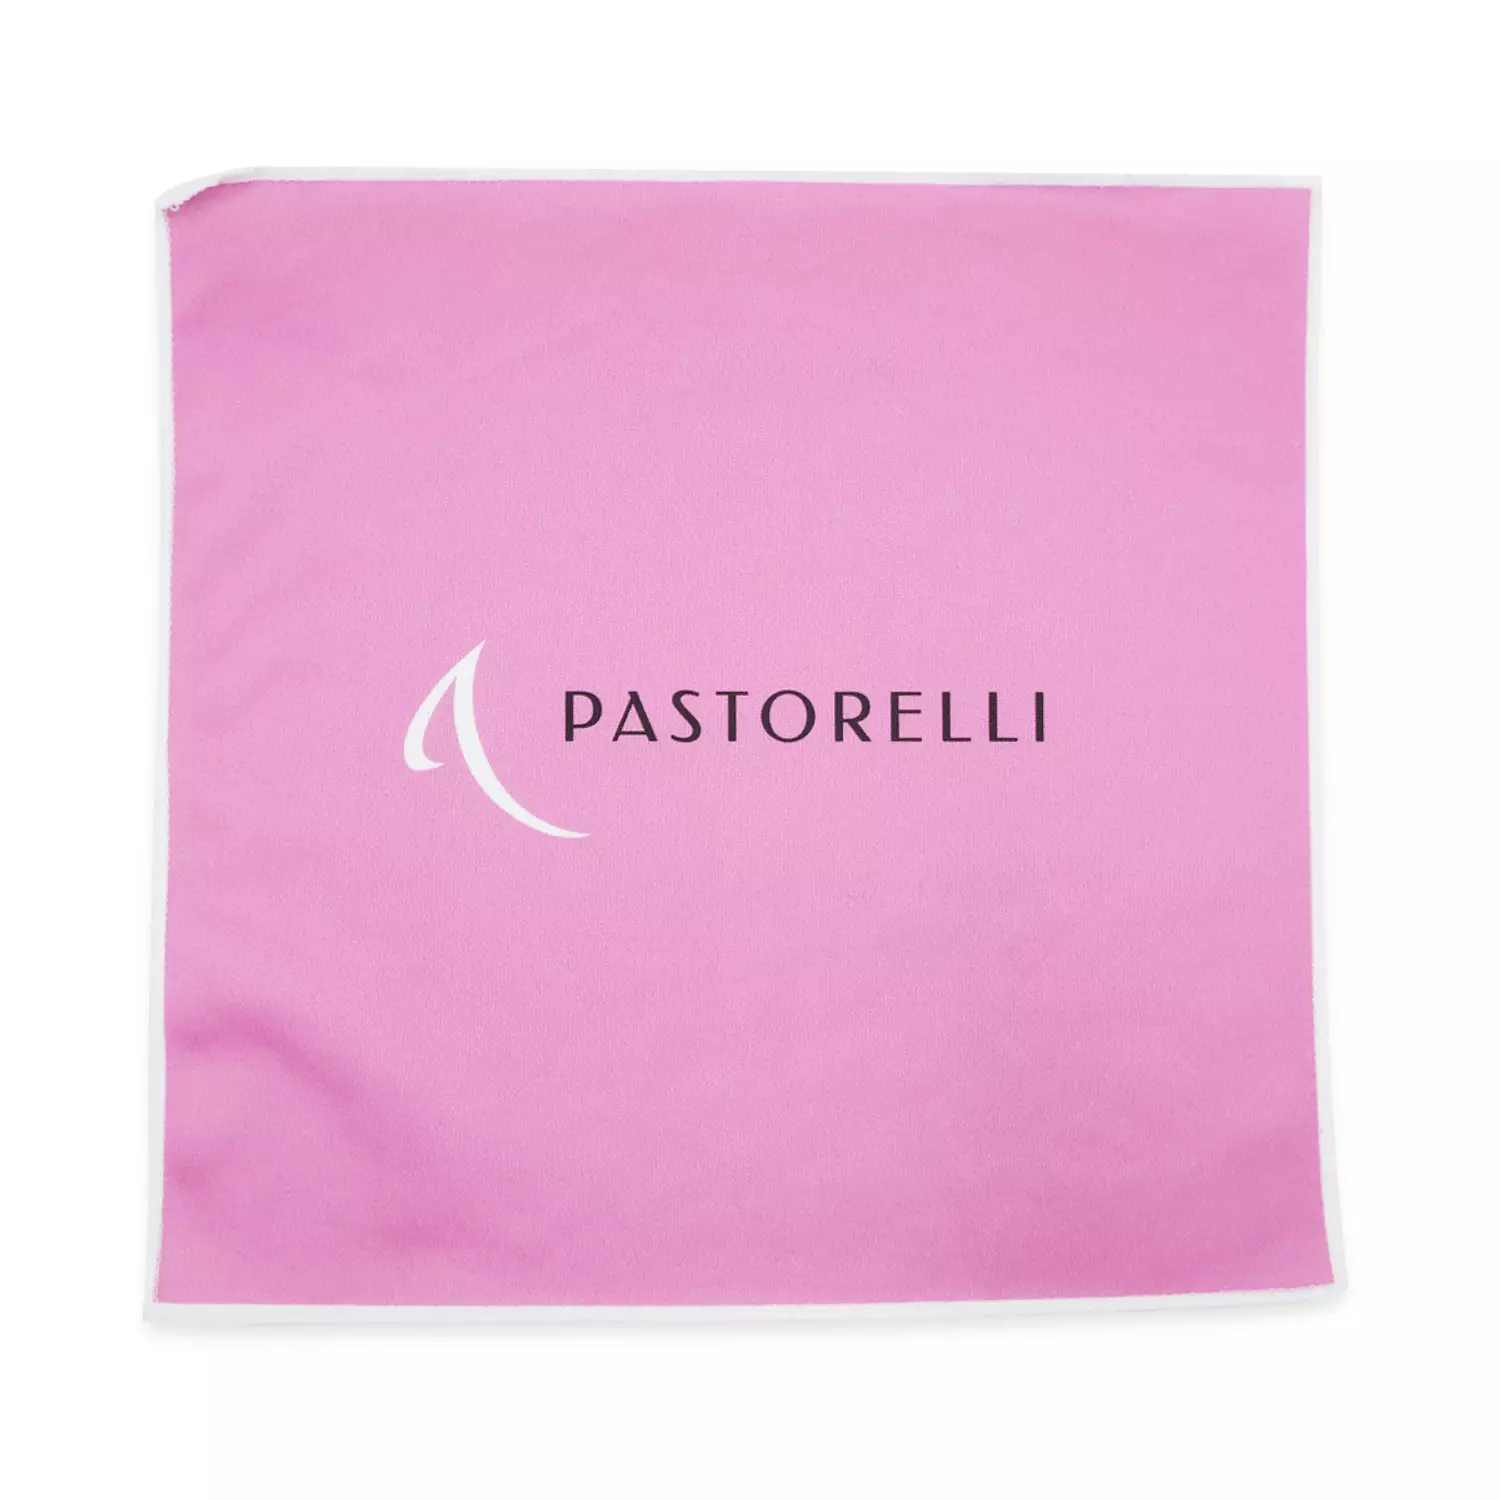 Pastorelli-Classic ball cleaning cloth hover image